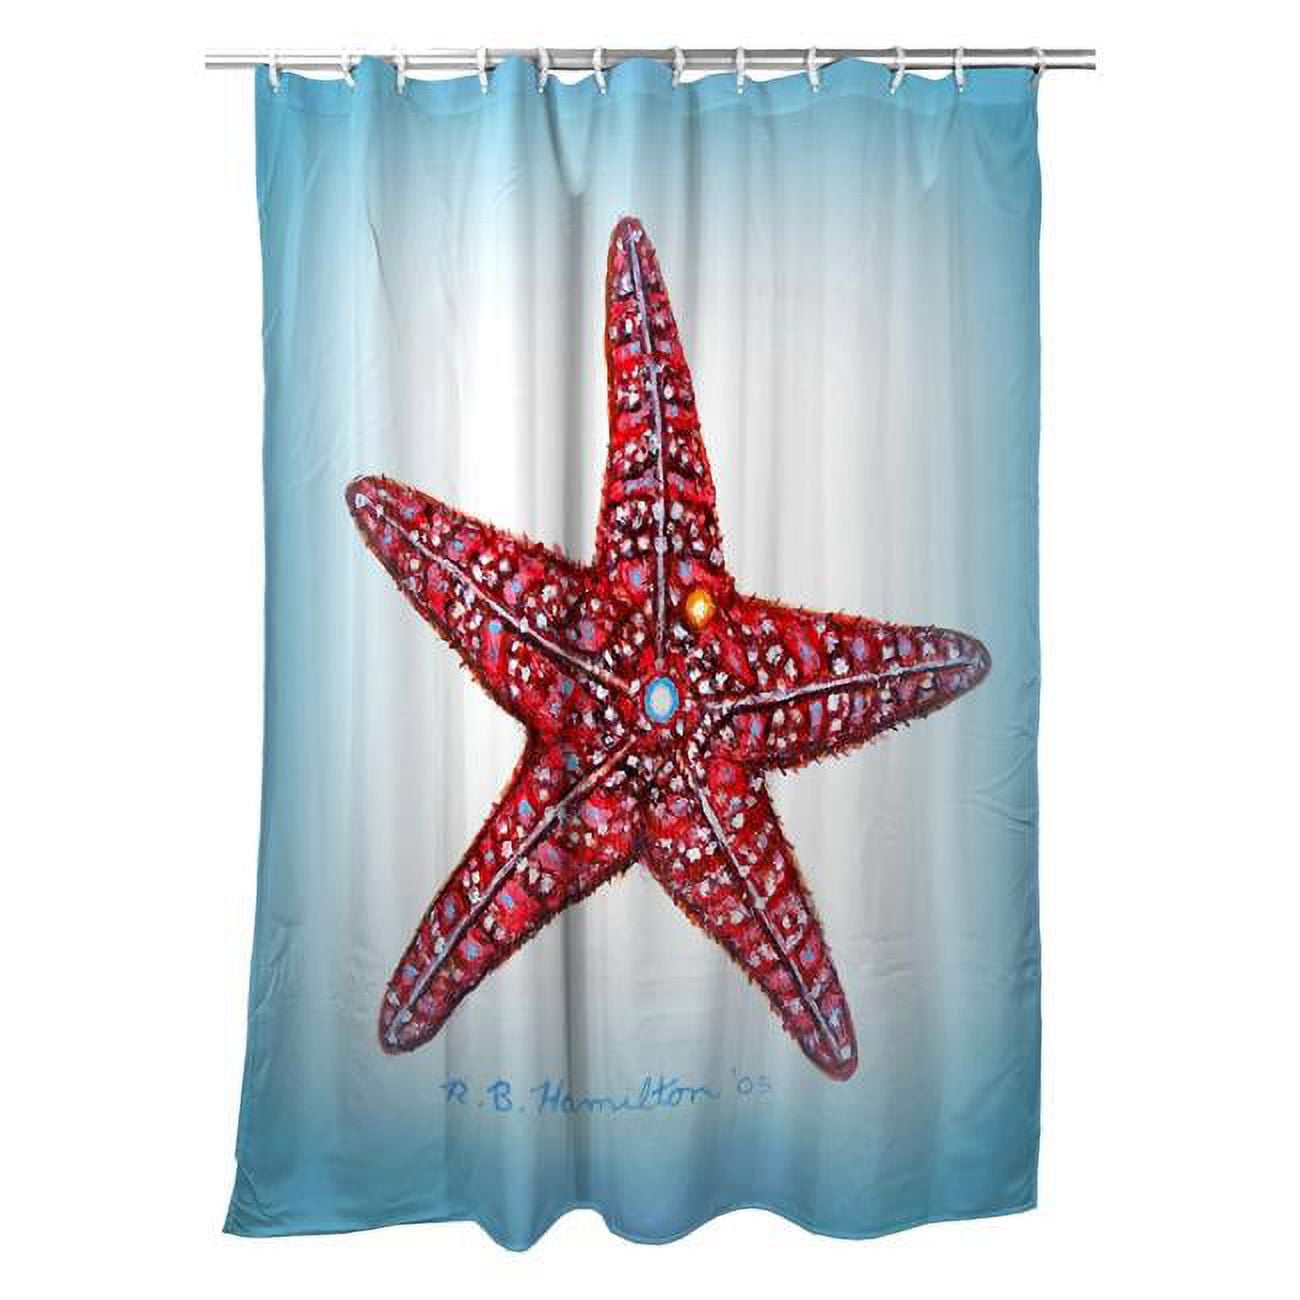 Picture of Betsydrake SH1169 71 x 74 in. Dicks Starfish Shower Curtain